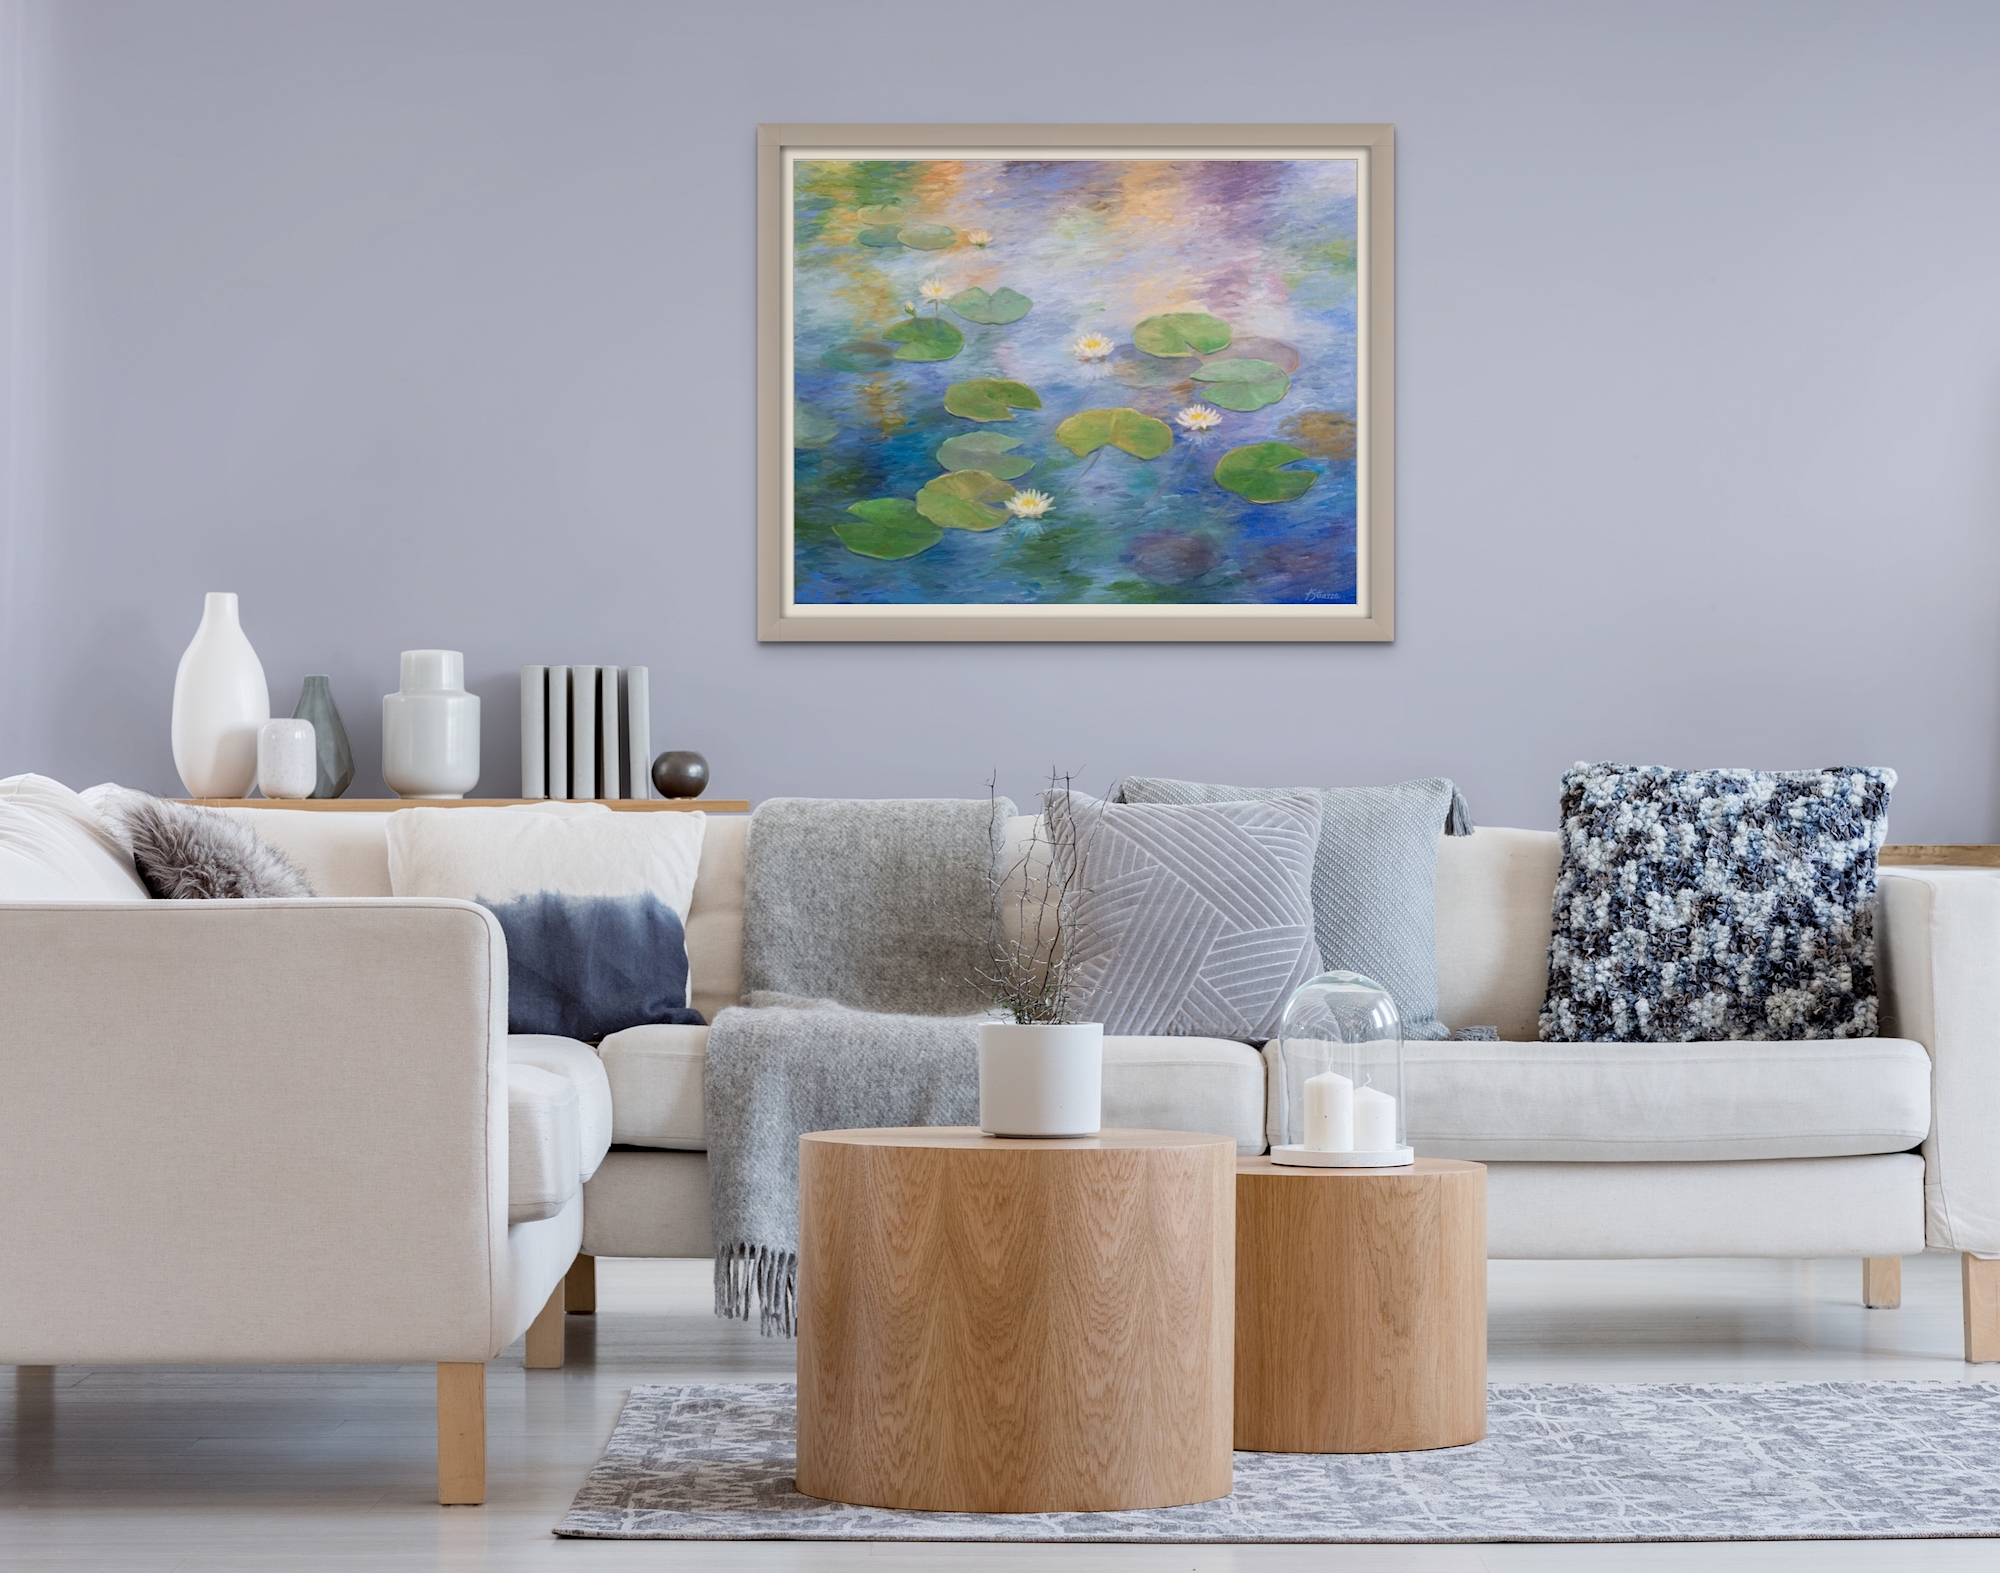 Peaceable Lilly Pond original oil painting by Lisa Strazza